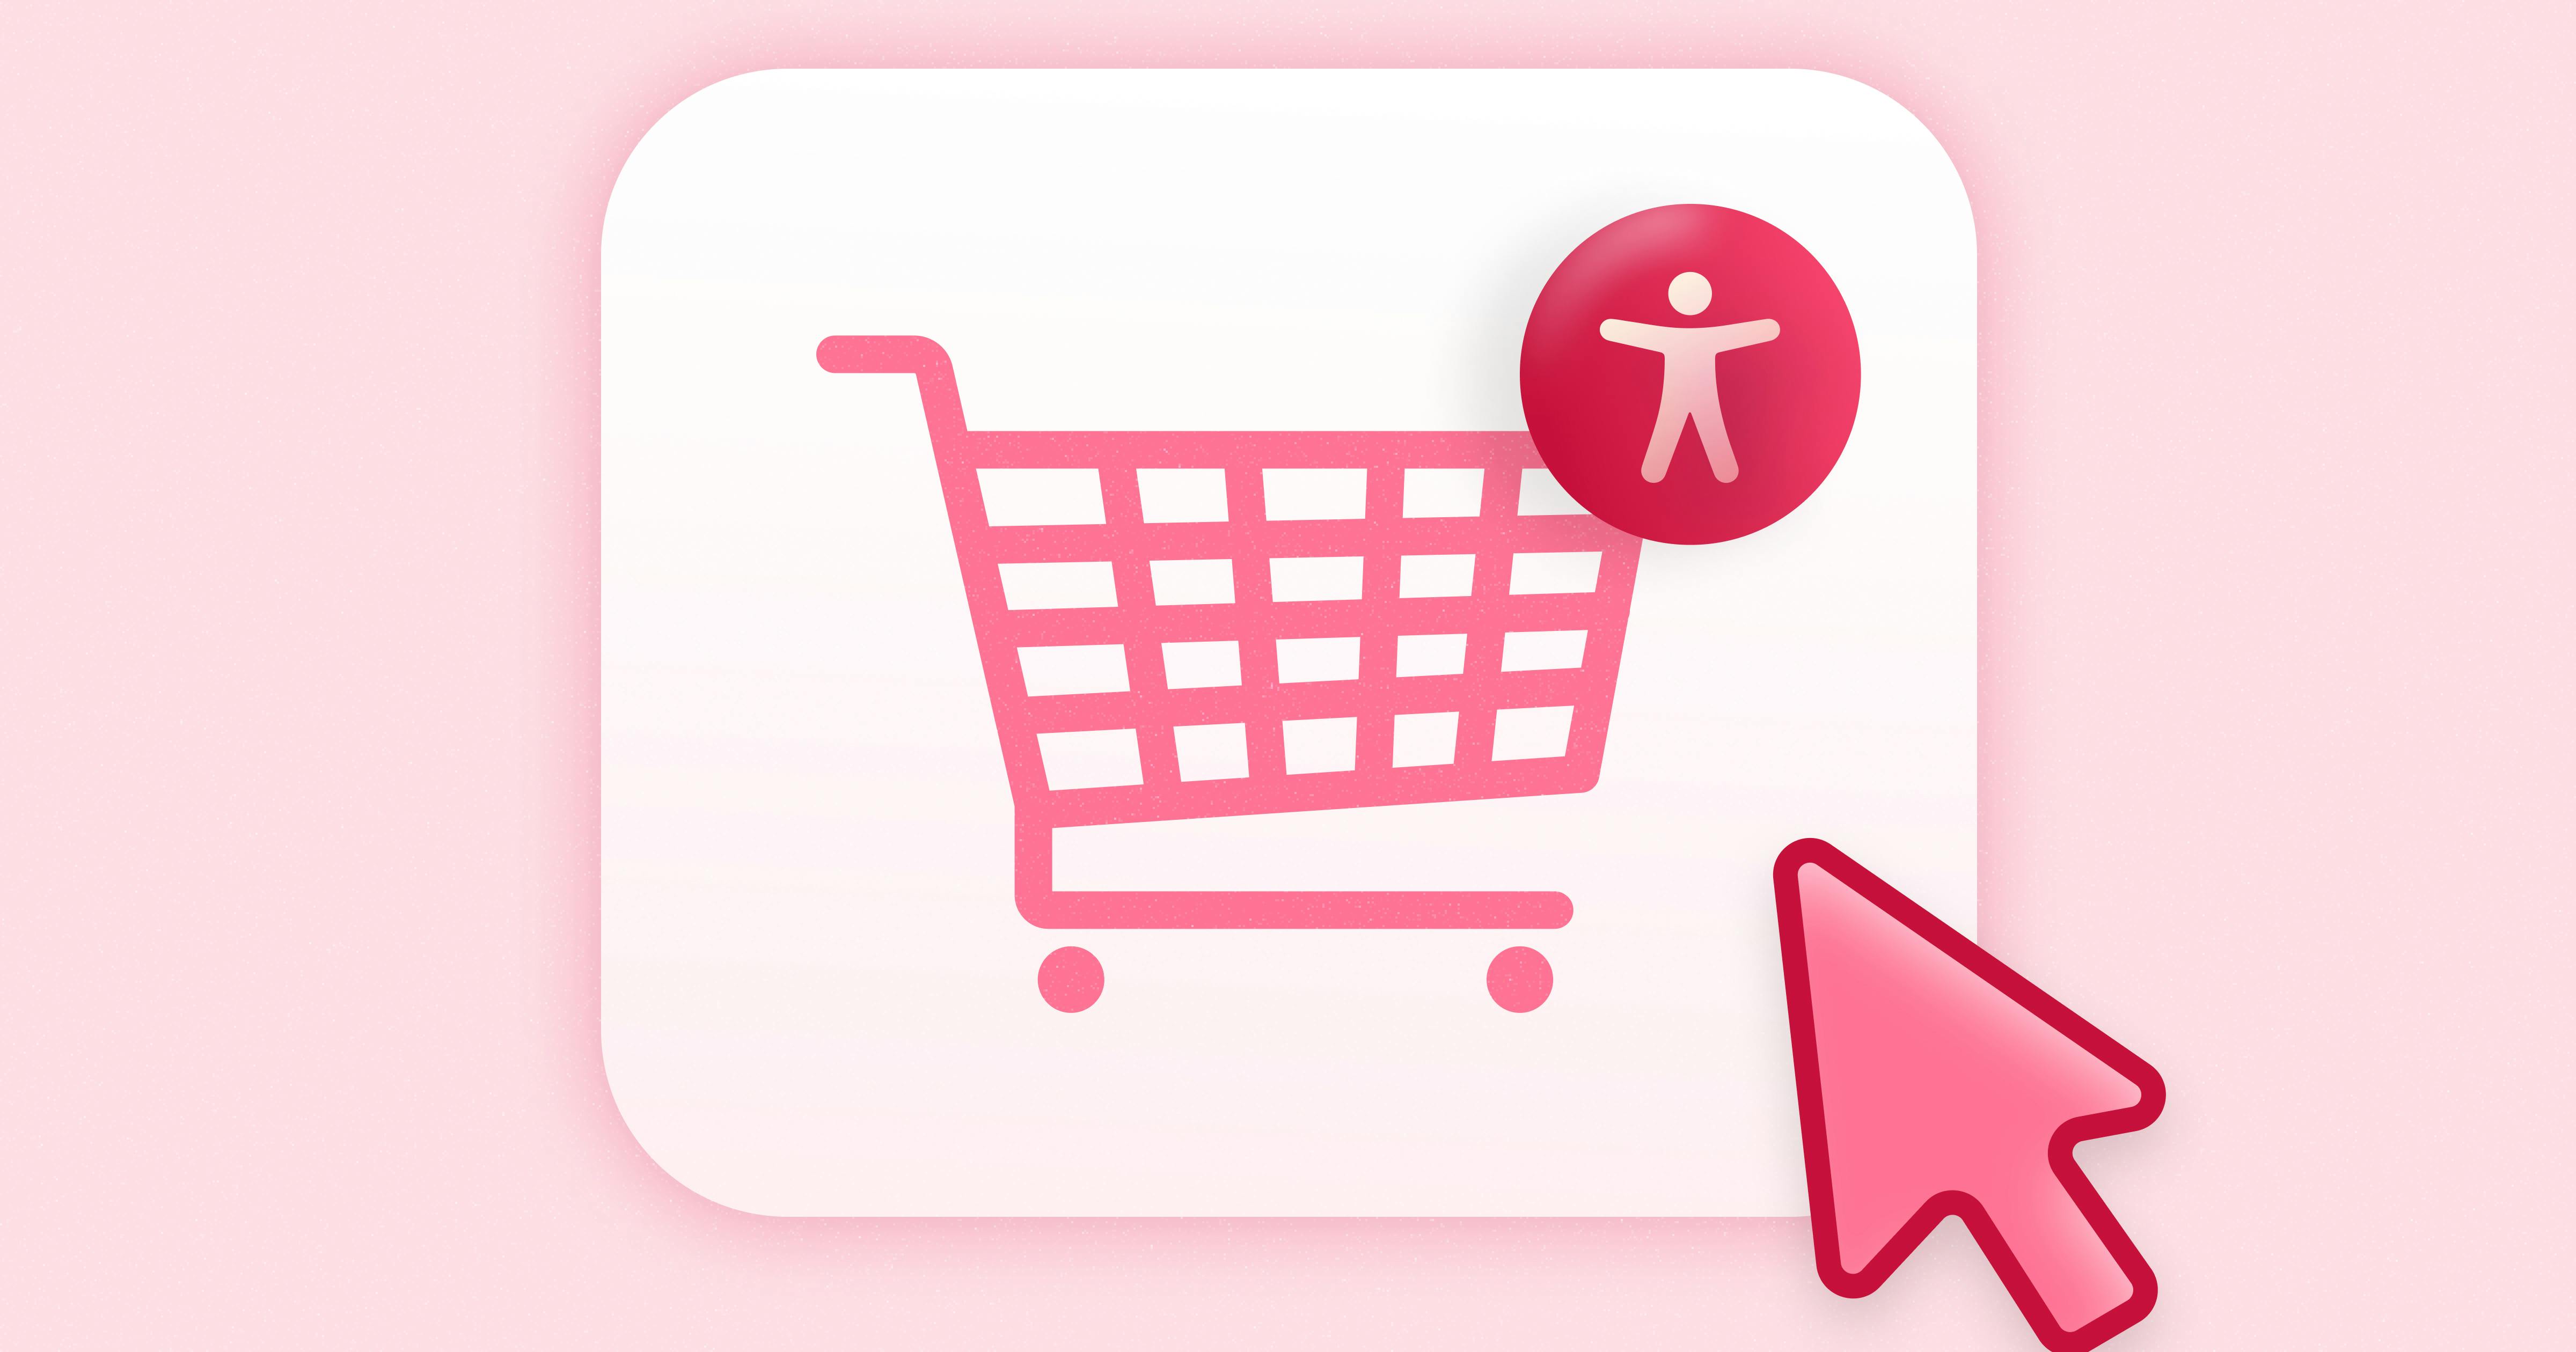 An icon of a shopping cart with an accessibility icon on the corner. A mouse cursor is poised over the icon.